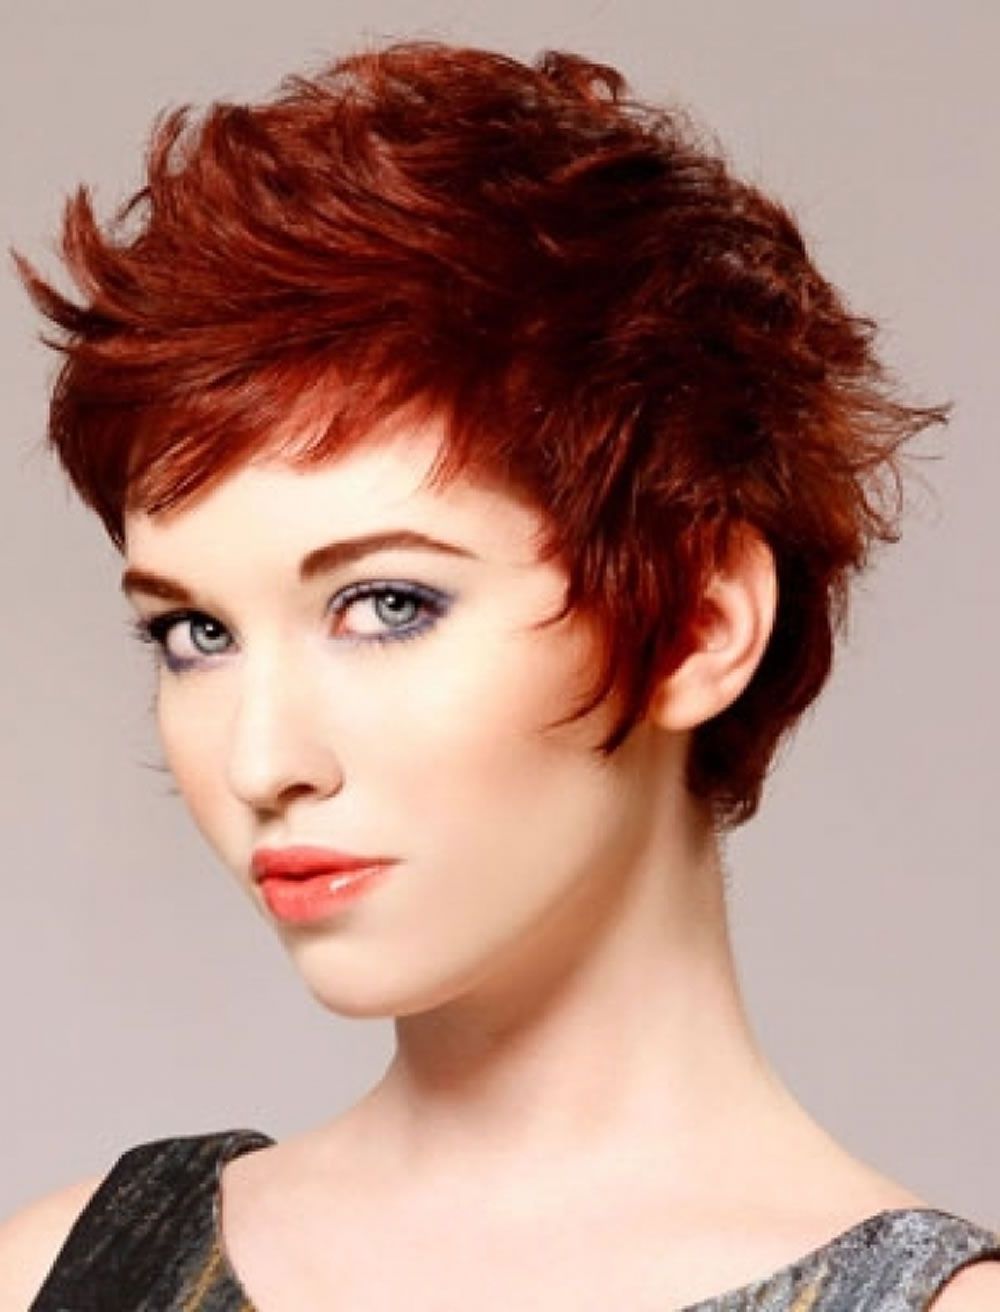 20 Short Haircuts For Red Hair New Design | Matsnilssonmma Inside Short Hairstyles With Red Hair (View 5 of 25)